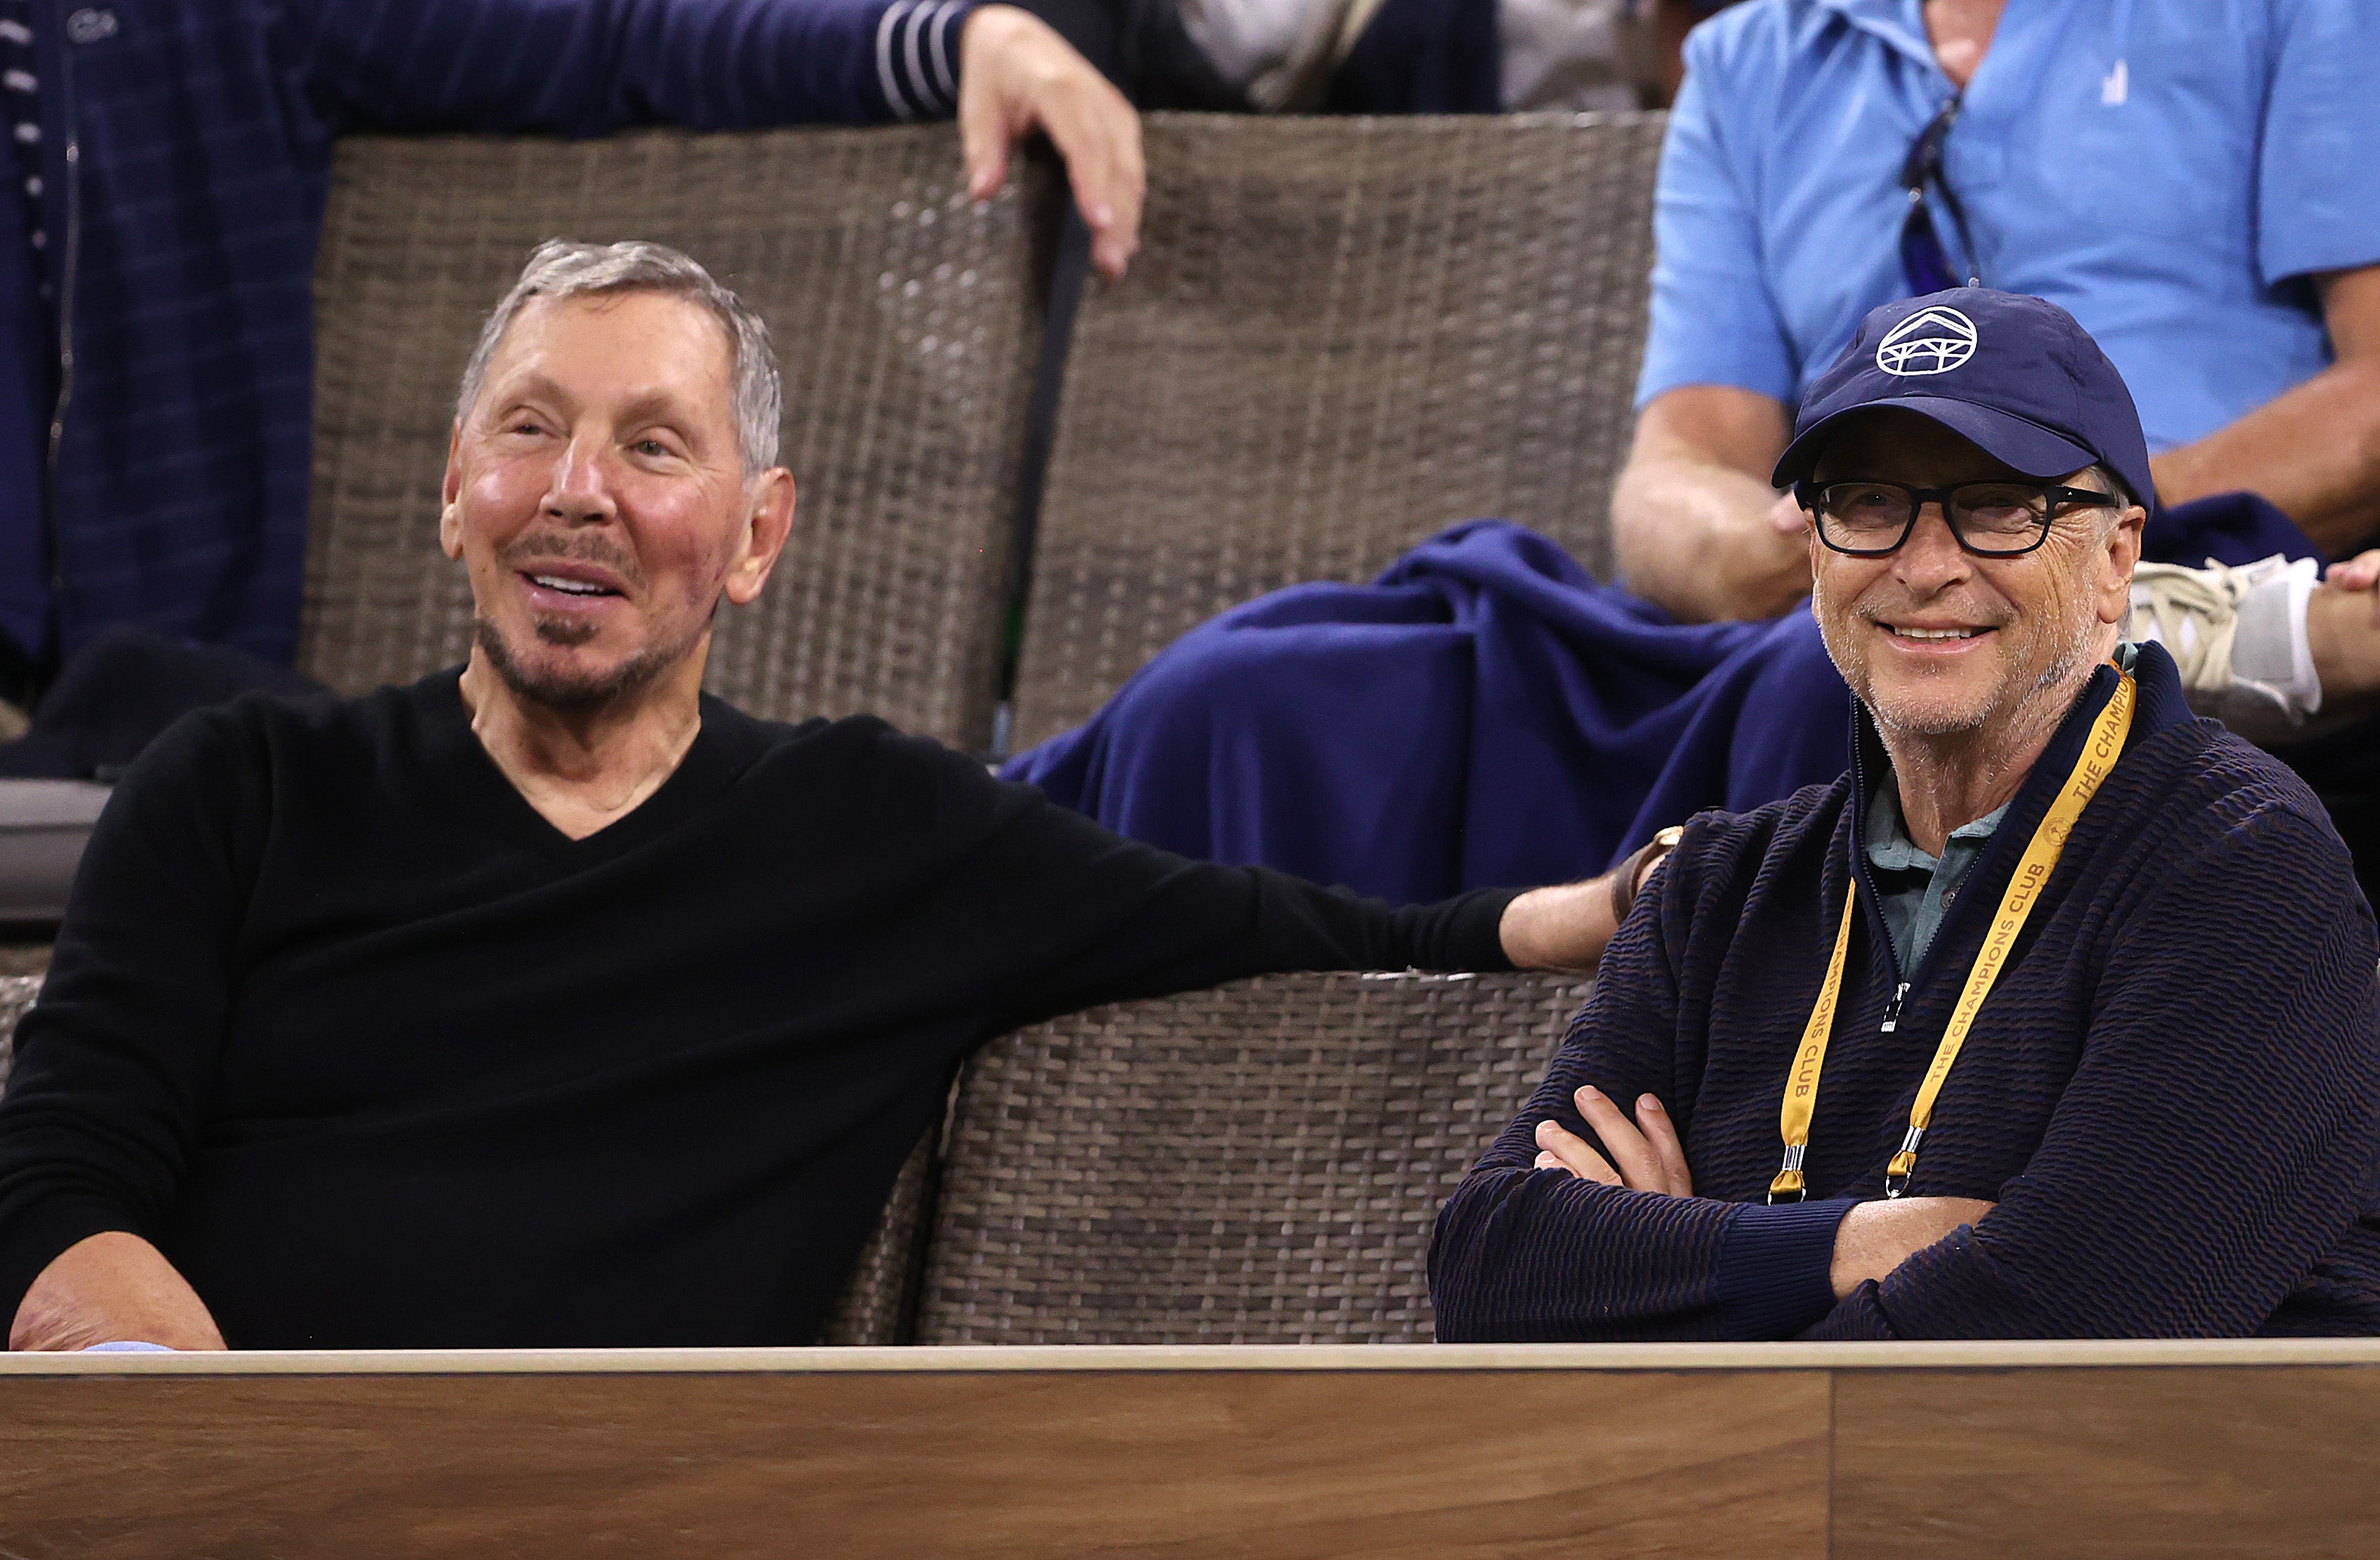 Larry Ellison, the founder of Oracle, sits beside his fellow billionaire Bill Gates. (Photo: Sean M. Haffey, Getty Images)